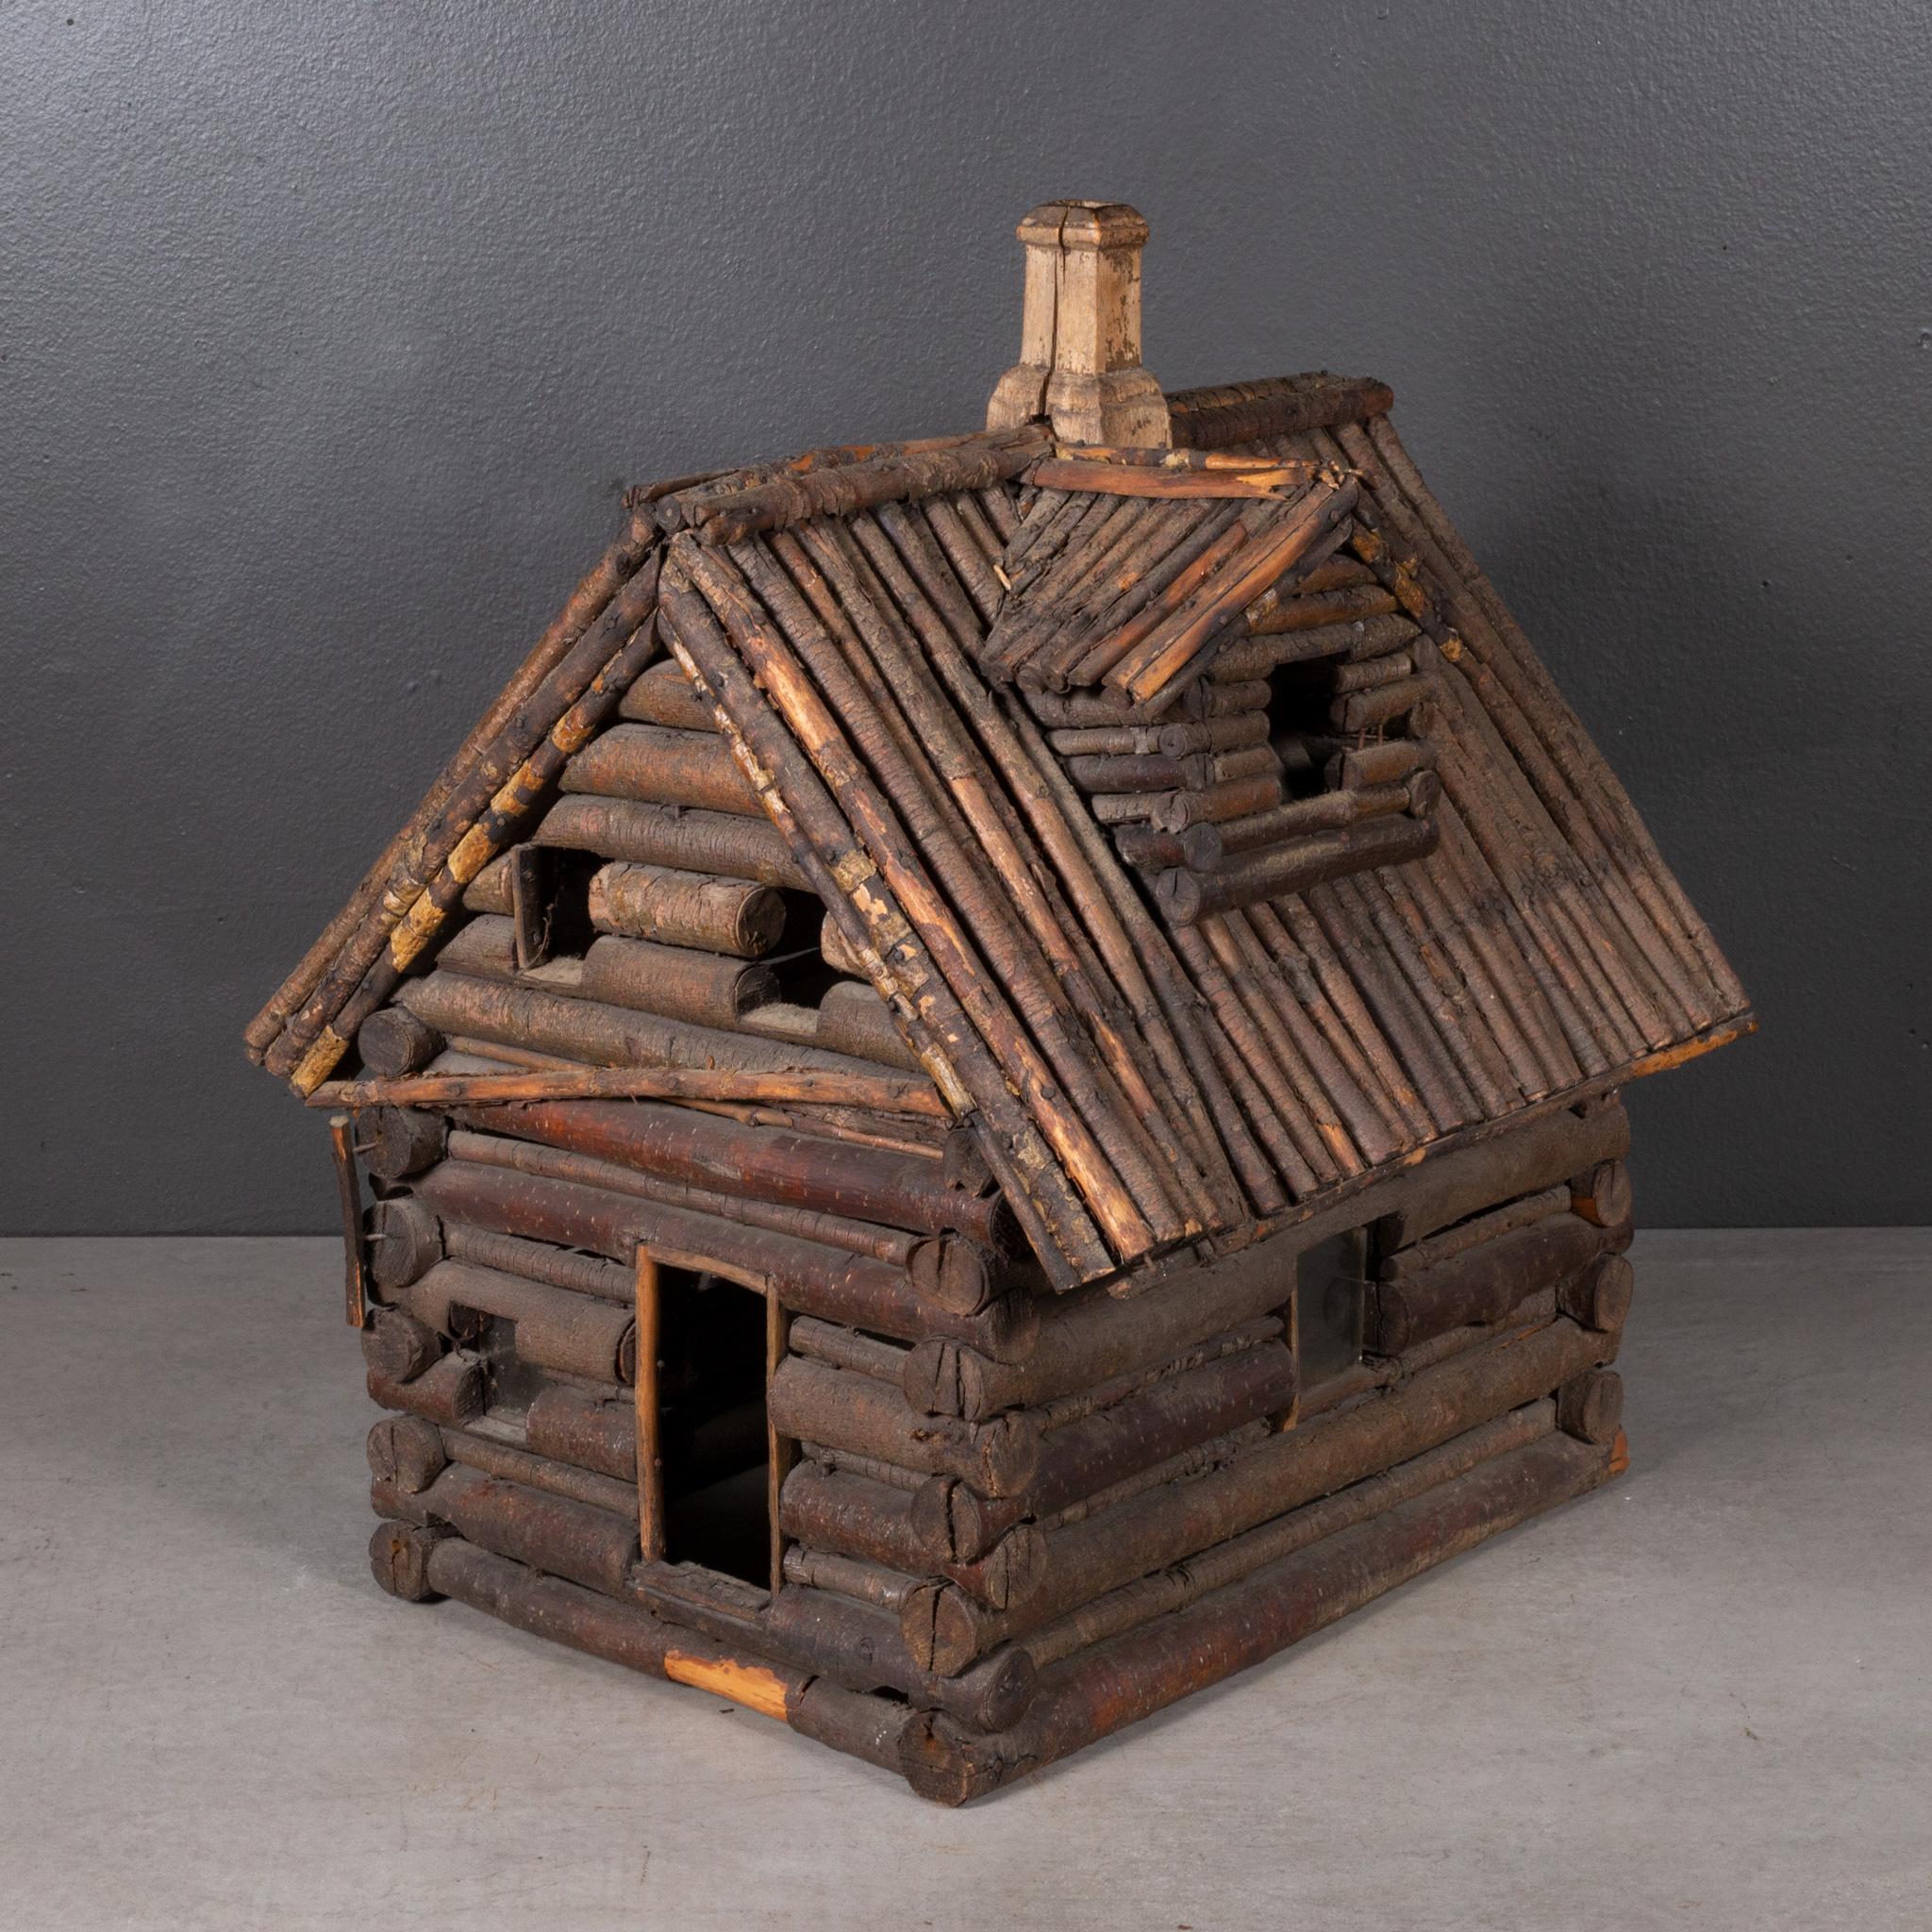 ABOUT

An original handmade folk art log cabin model with a chimney, one door and seven windows. Three windows have glass panes.

    CREATOR Unknown.
    DATE OF MANUFACTURE c.1900-1940.
    MATERIALS AND TECHNIQUES Wood, Glass.
    CONDITION Good.